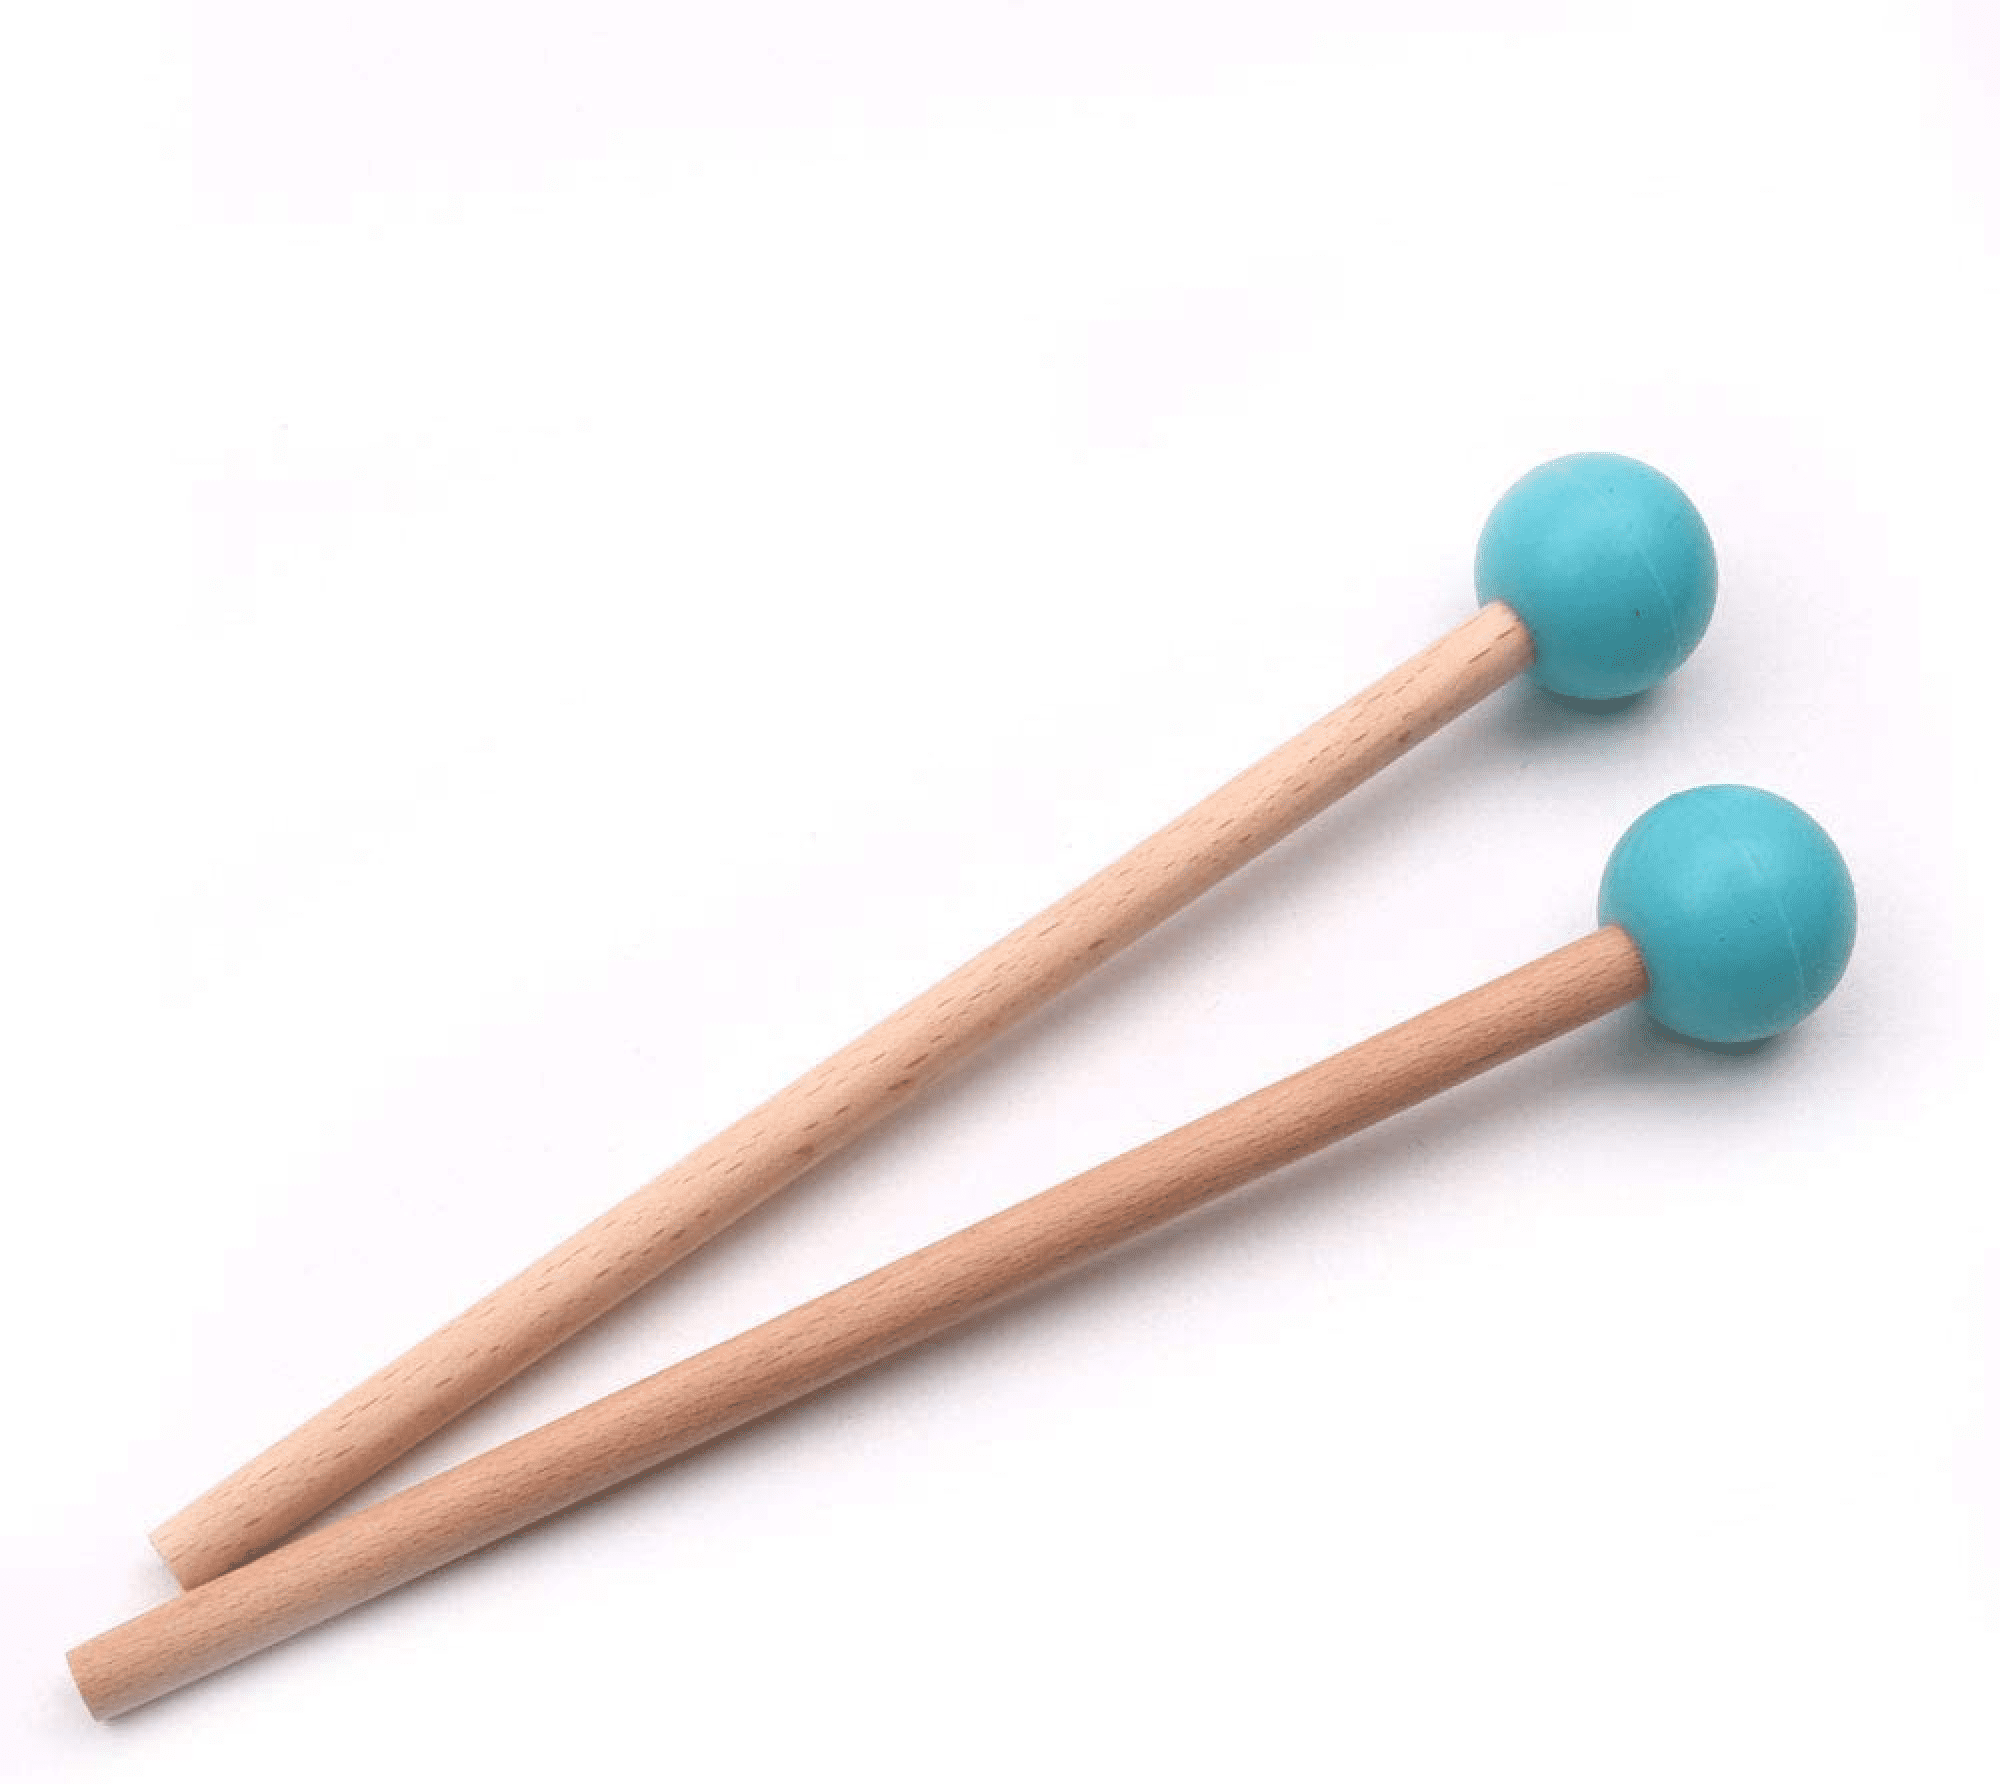 Pieces 7.28 Long Blue Marimba Sticks Mallets Xylophone Piano Hammer  Percussion Instrument Accessories